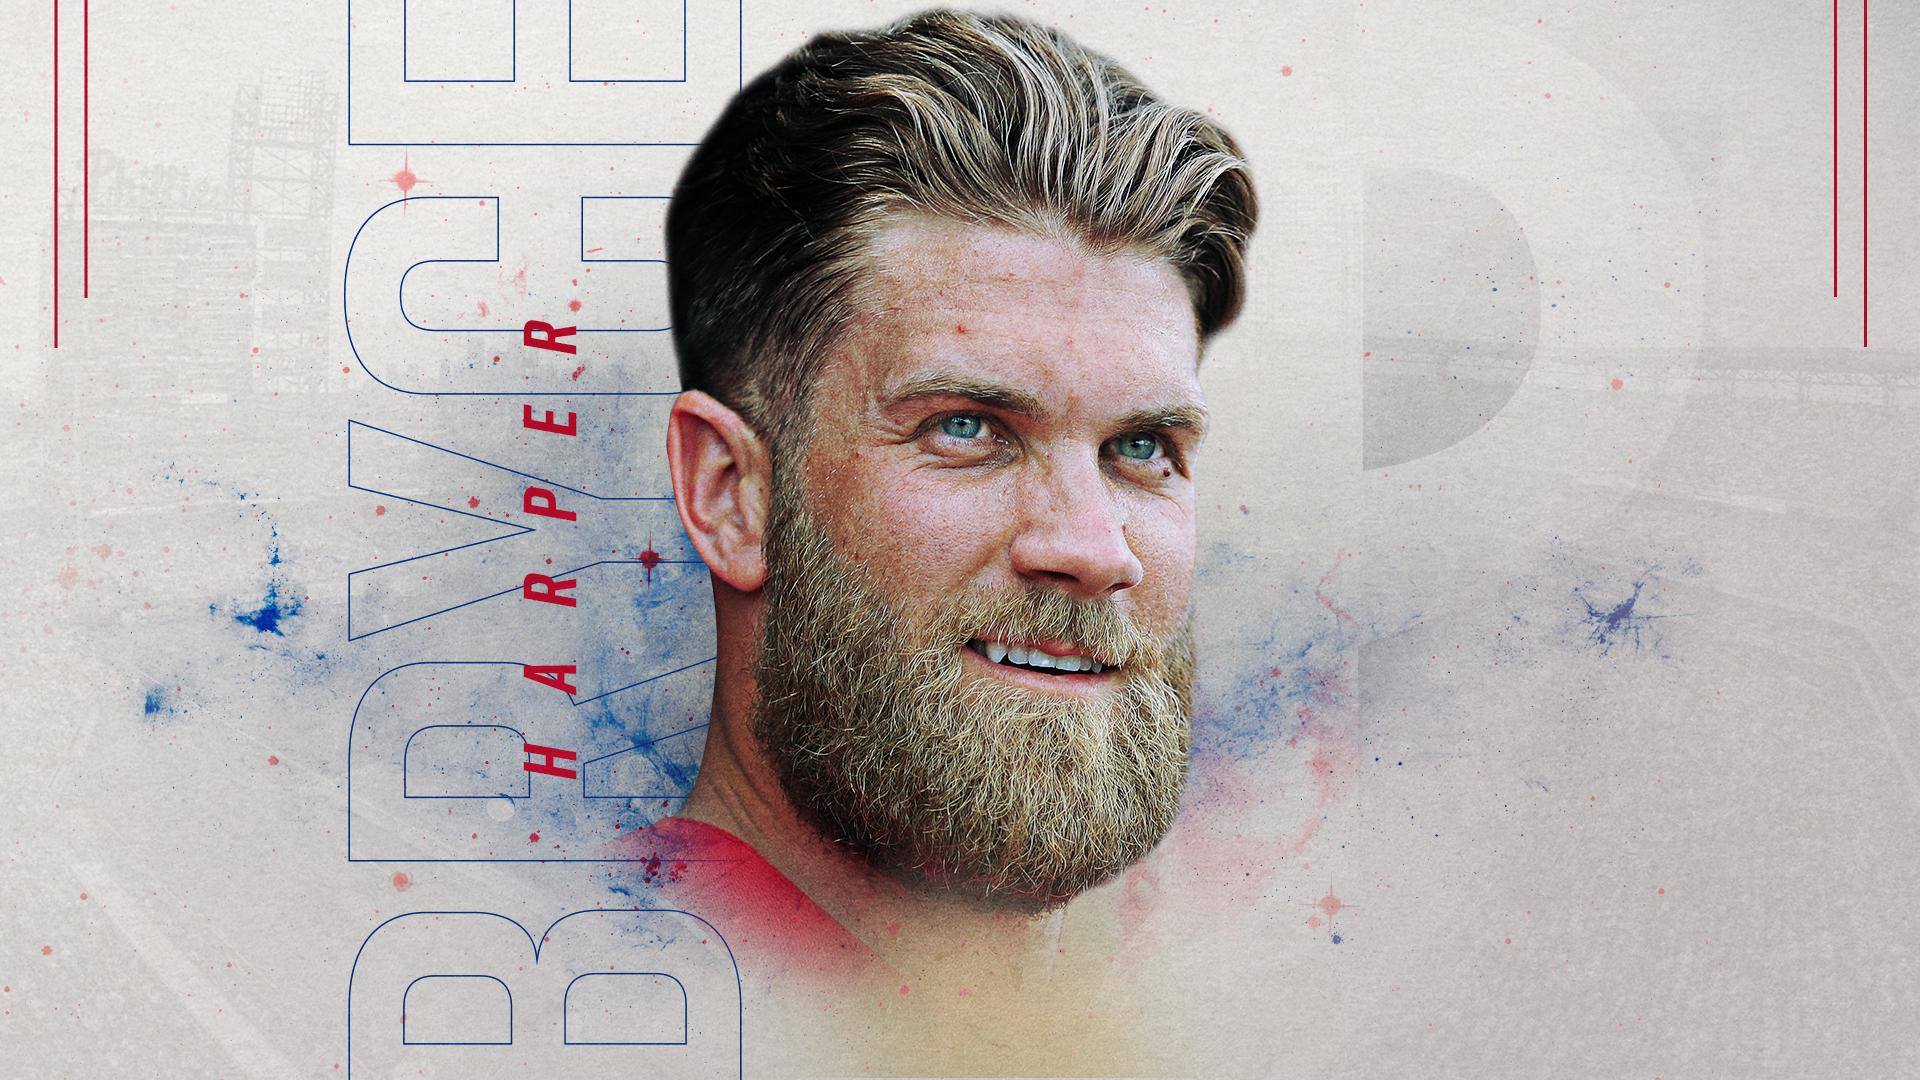 Bryce Harper: A Union Perspective - UFCW Local 152